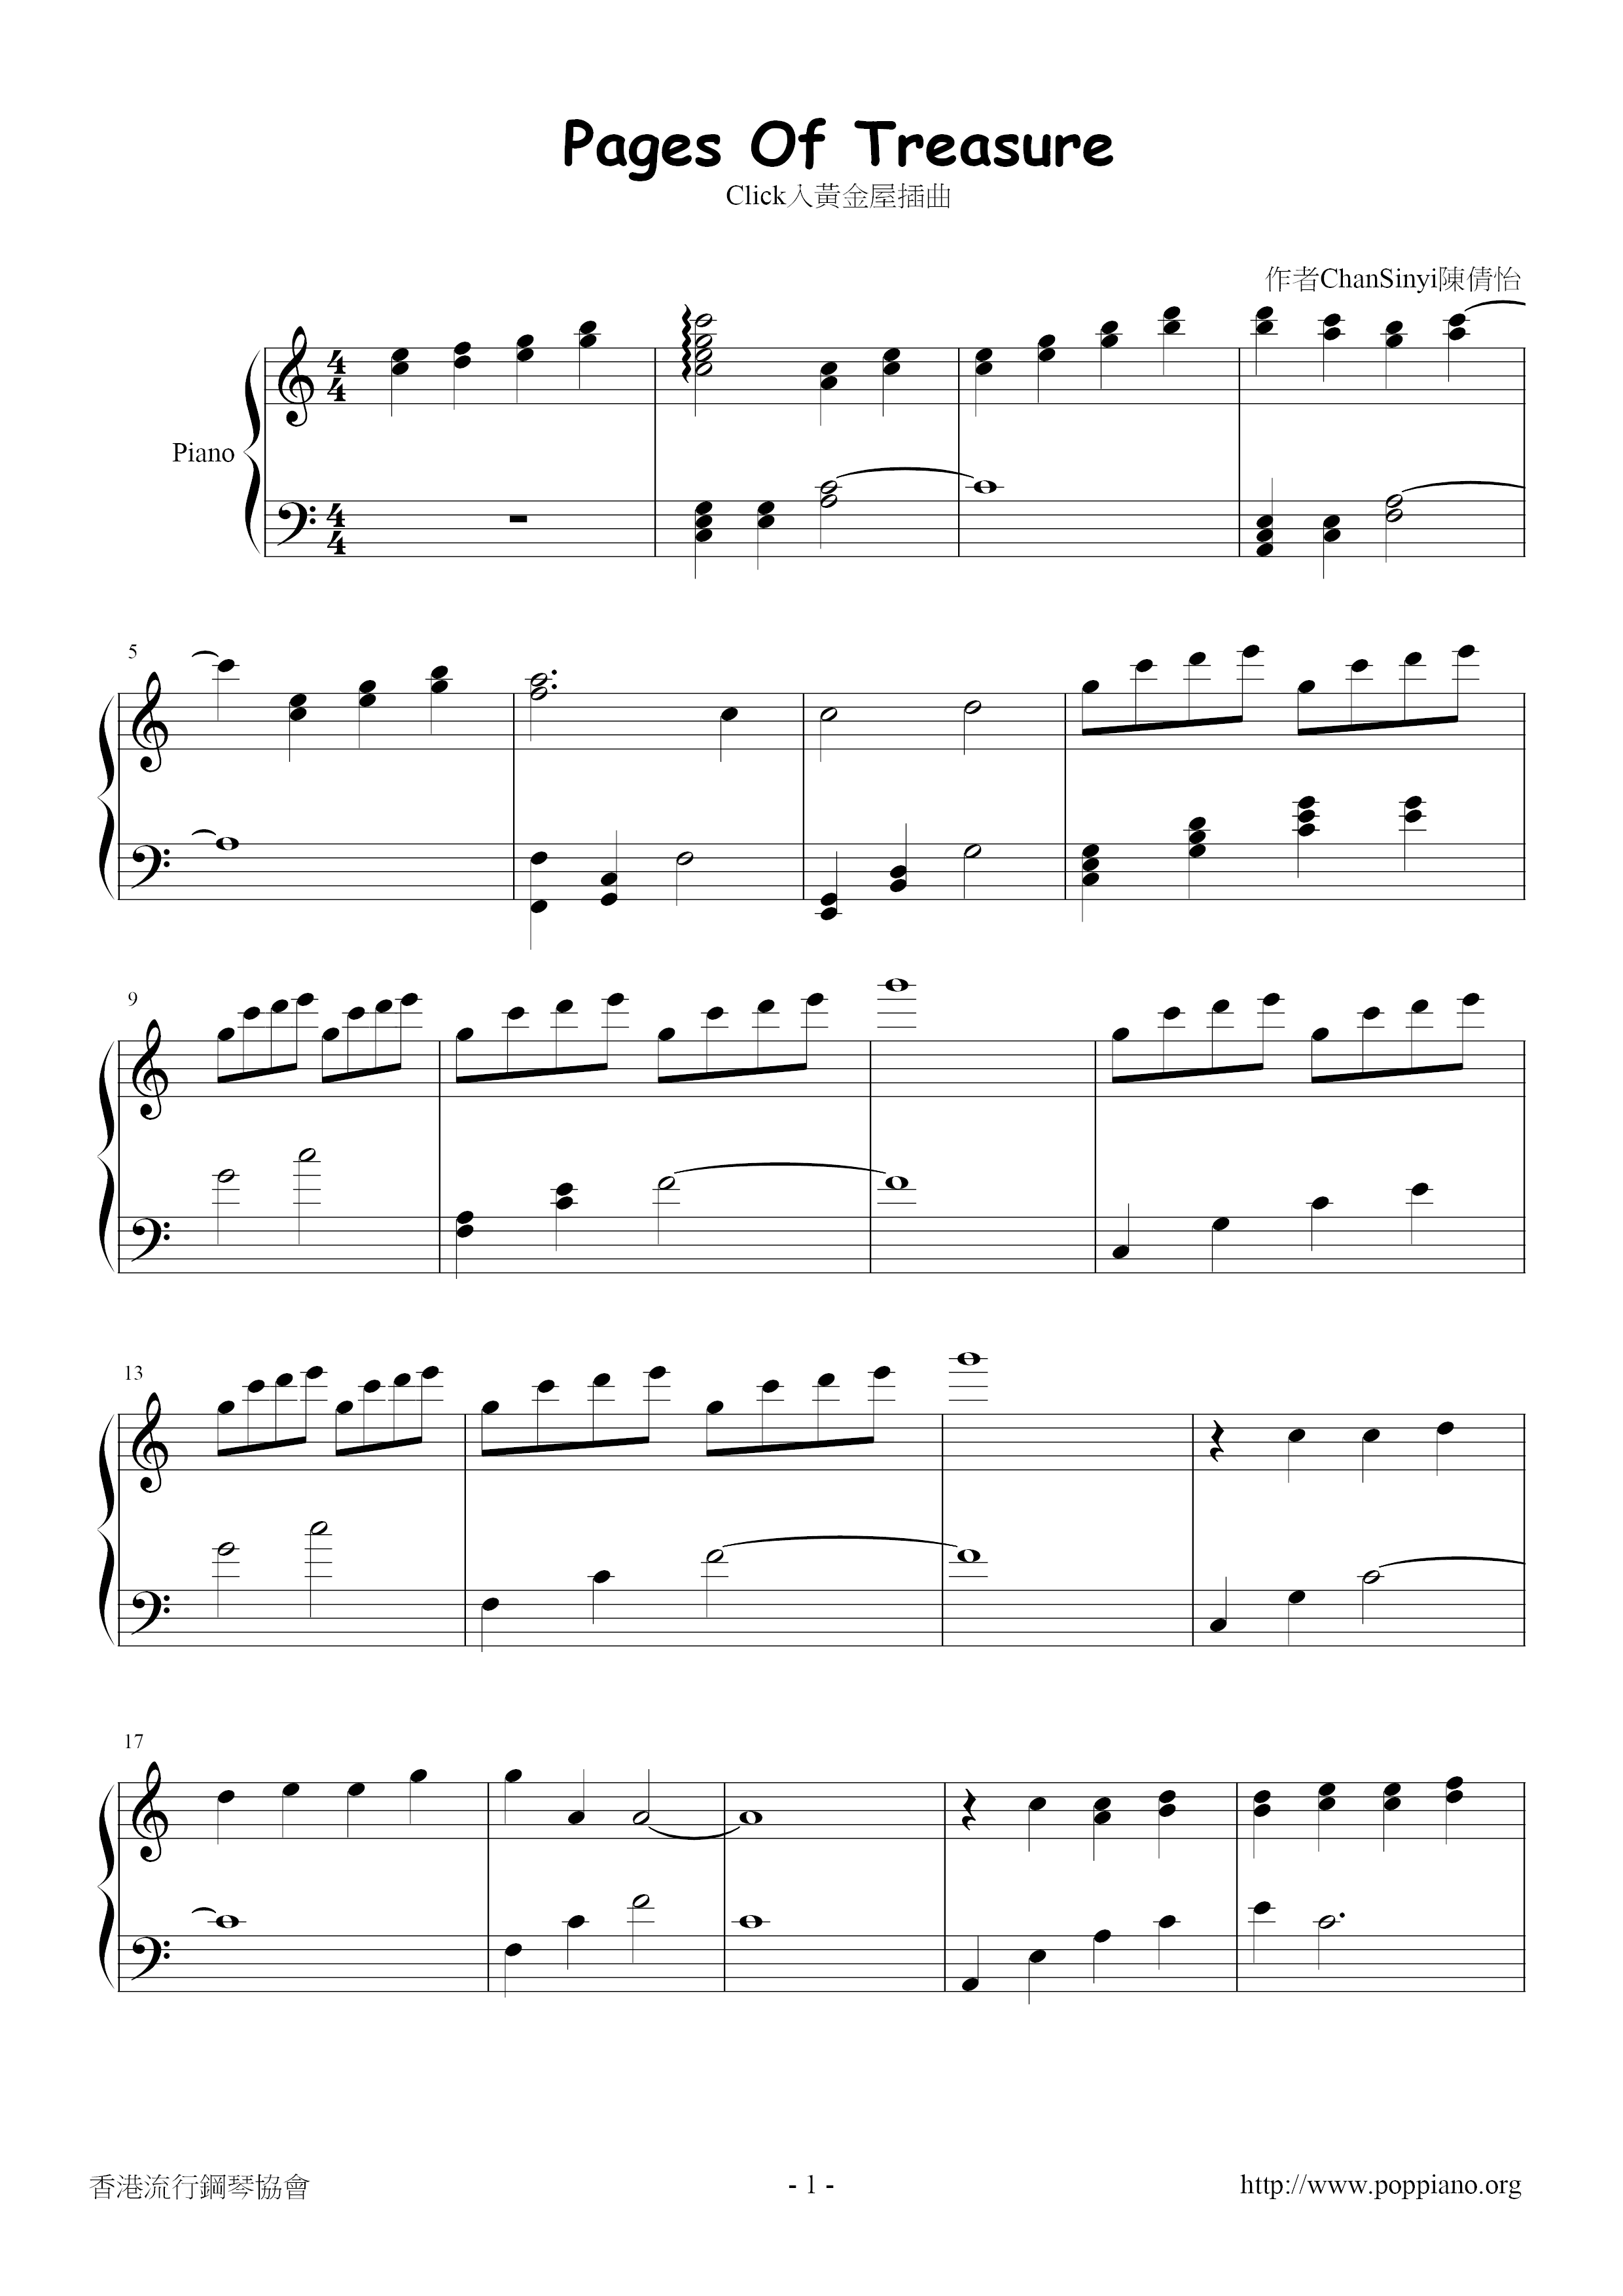 Pages Of Treasure Score